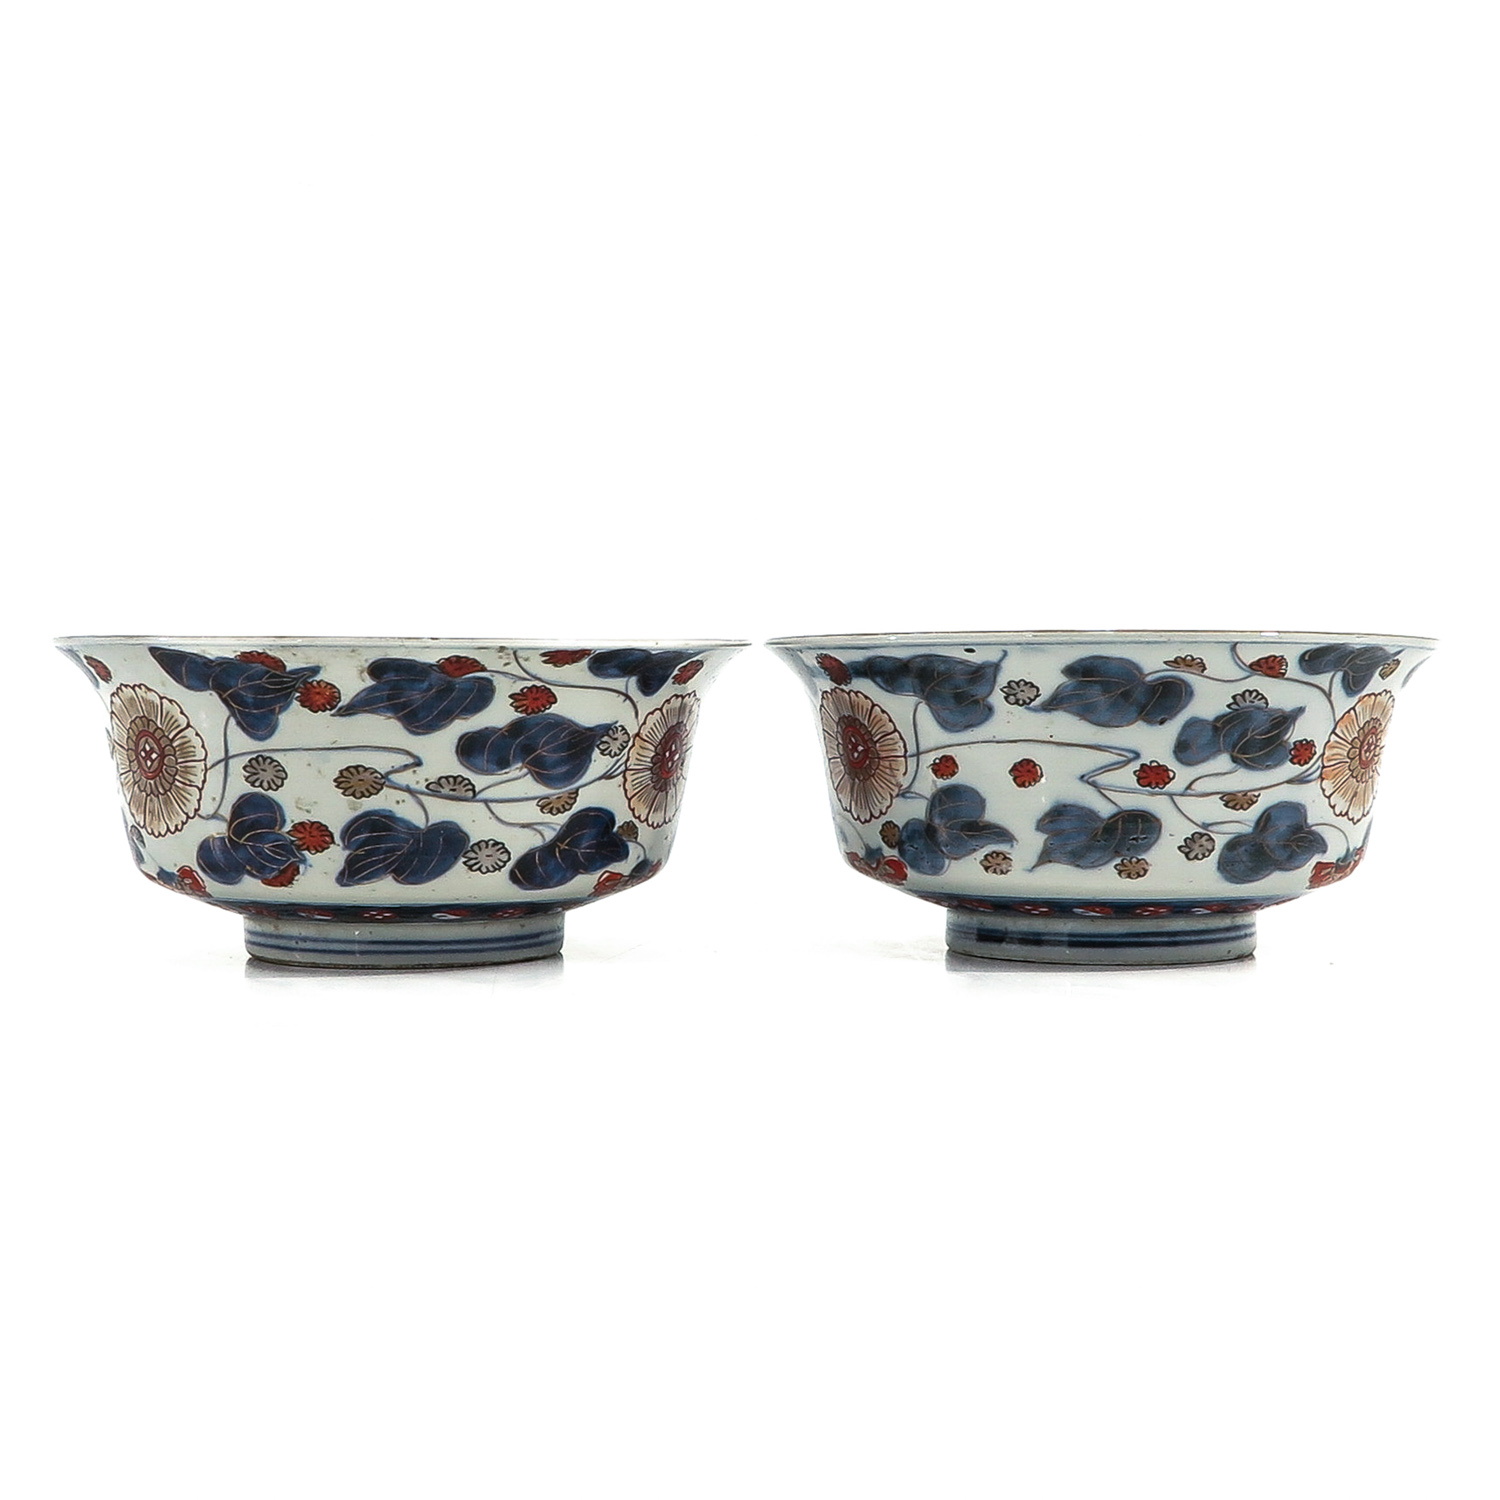 A Pair of Polychrome Serving Bowls - Image 3 of 10